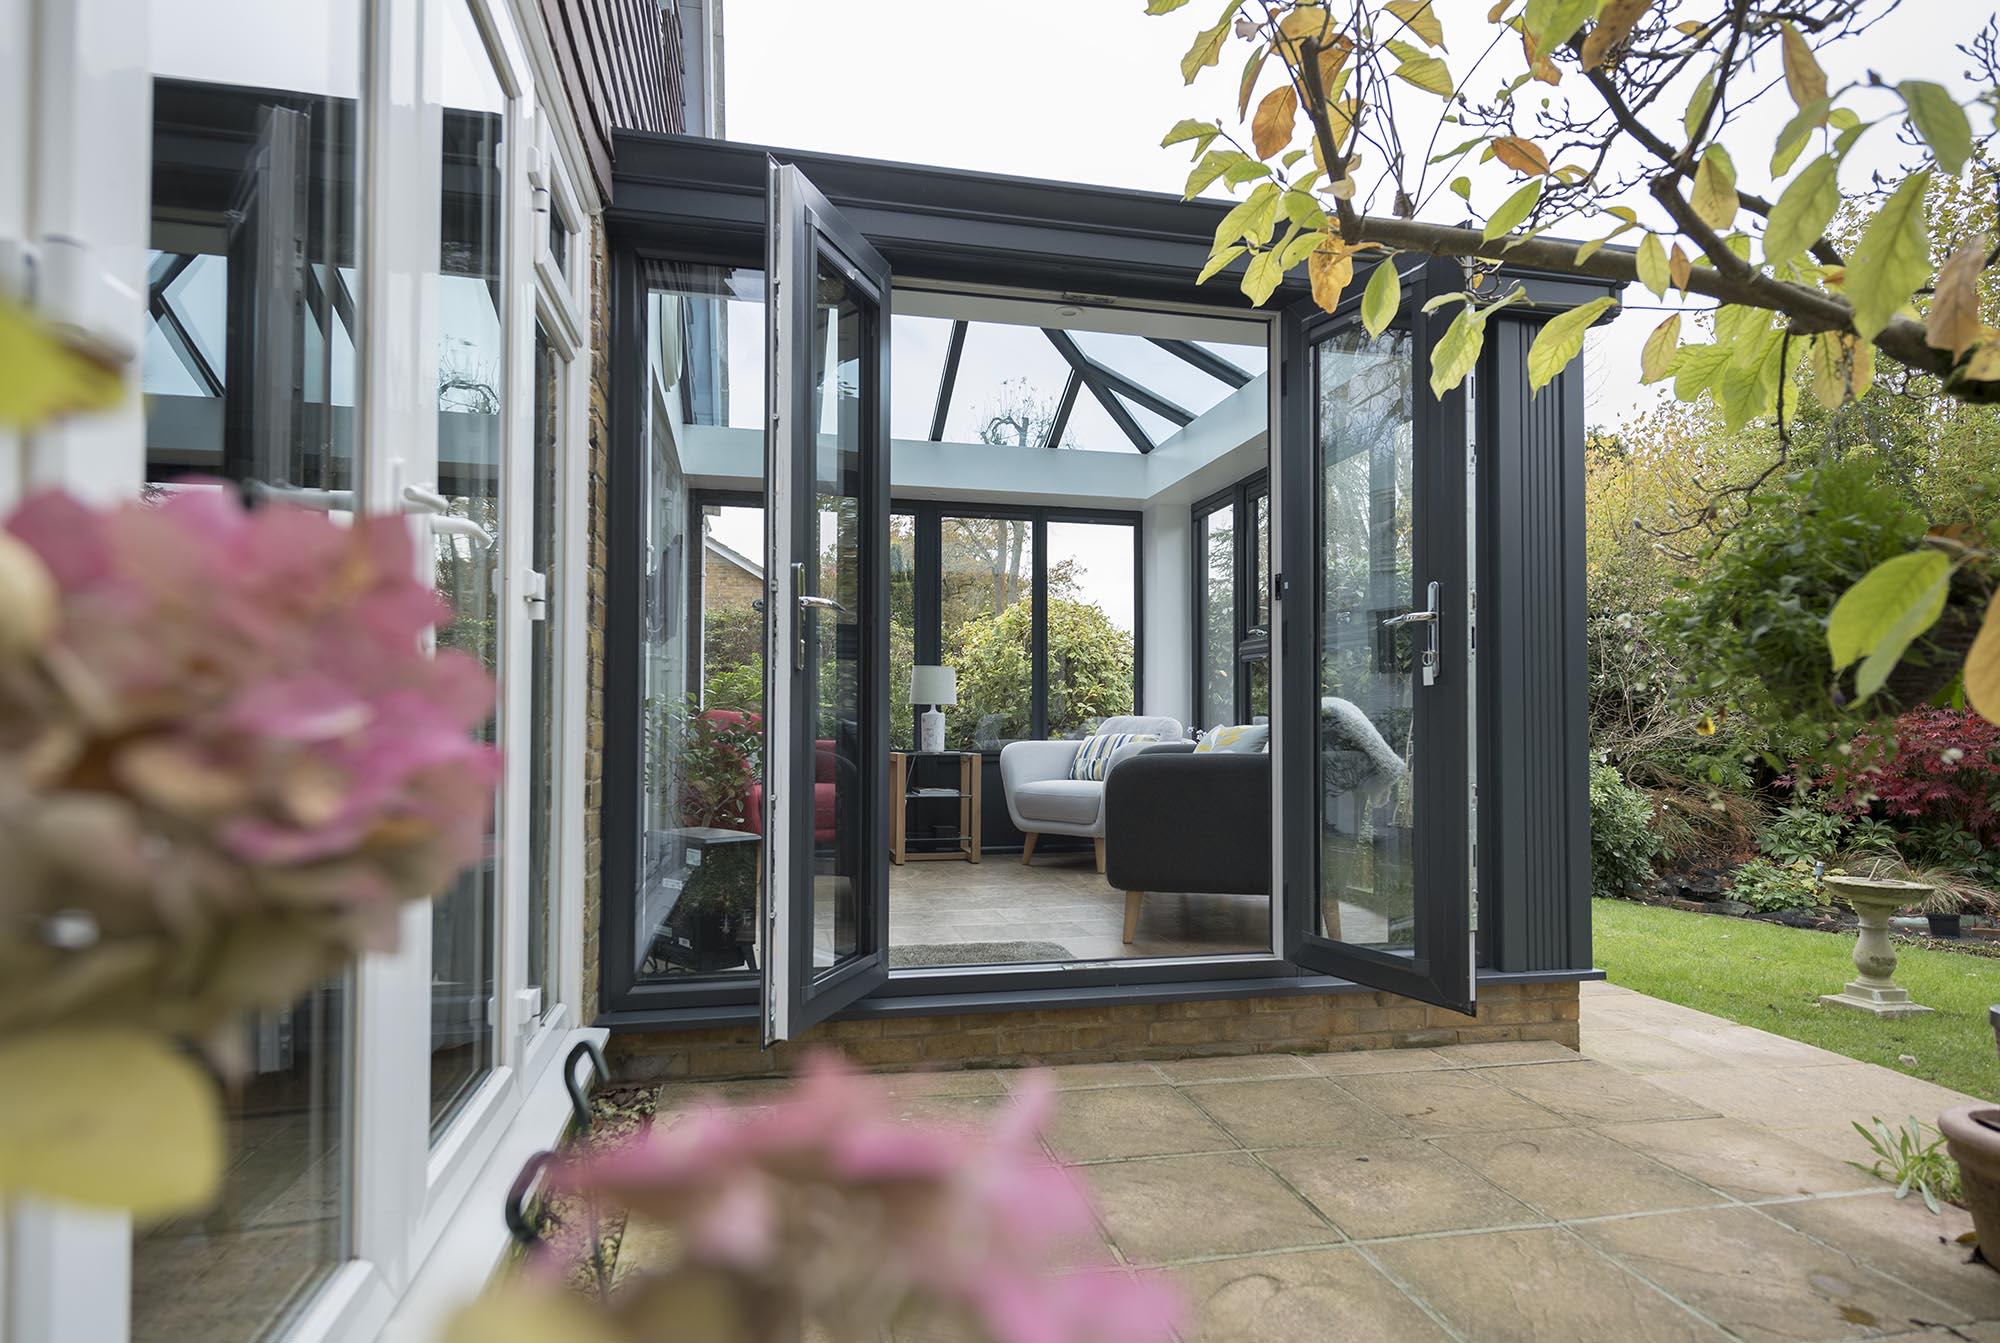 Contemporary conservatory with an impressive glass-to-roof design, showcasing a transparent ceiling that extends to the walls, allowing for an abundance of natural light and providing a spacious, open atmosphere with a full view of the sky and surrounding landscape.